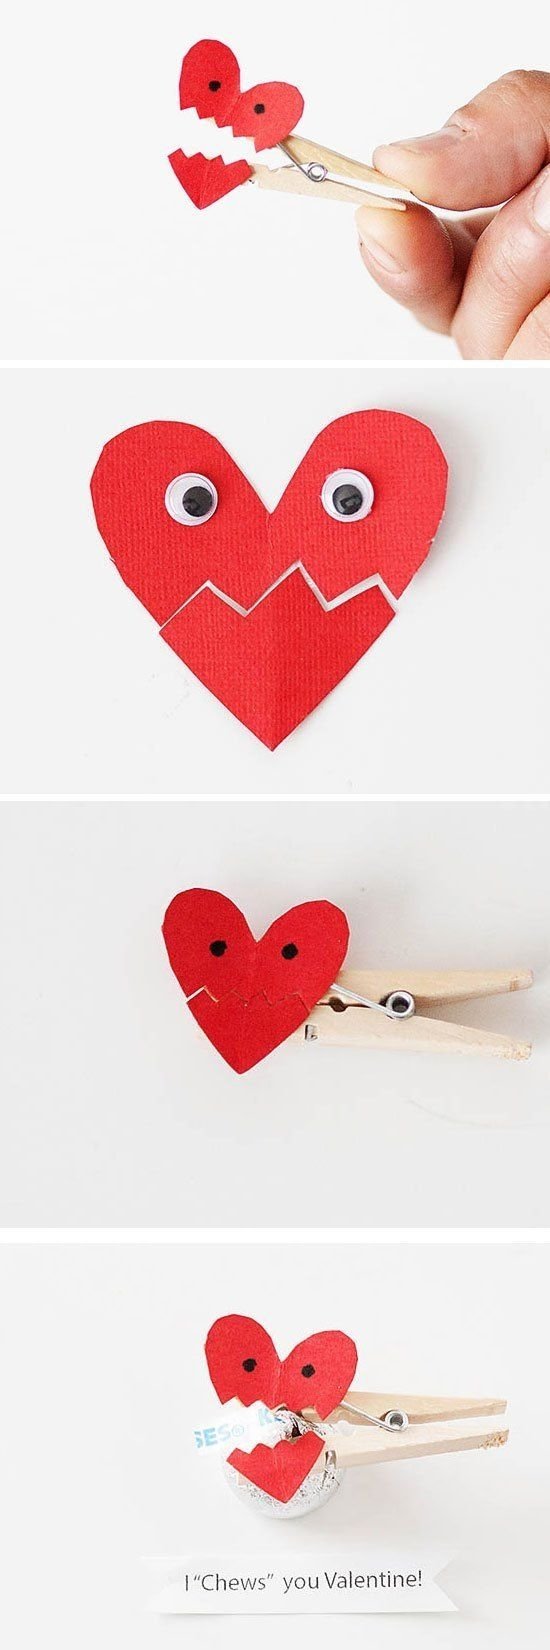 10 Most Popular Fun Ideas For Valentines Day 601 best valentines day ideas images on pinterest valantine day 2022